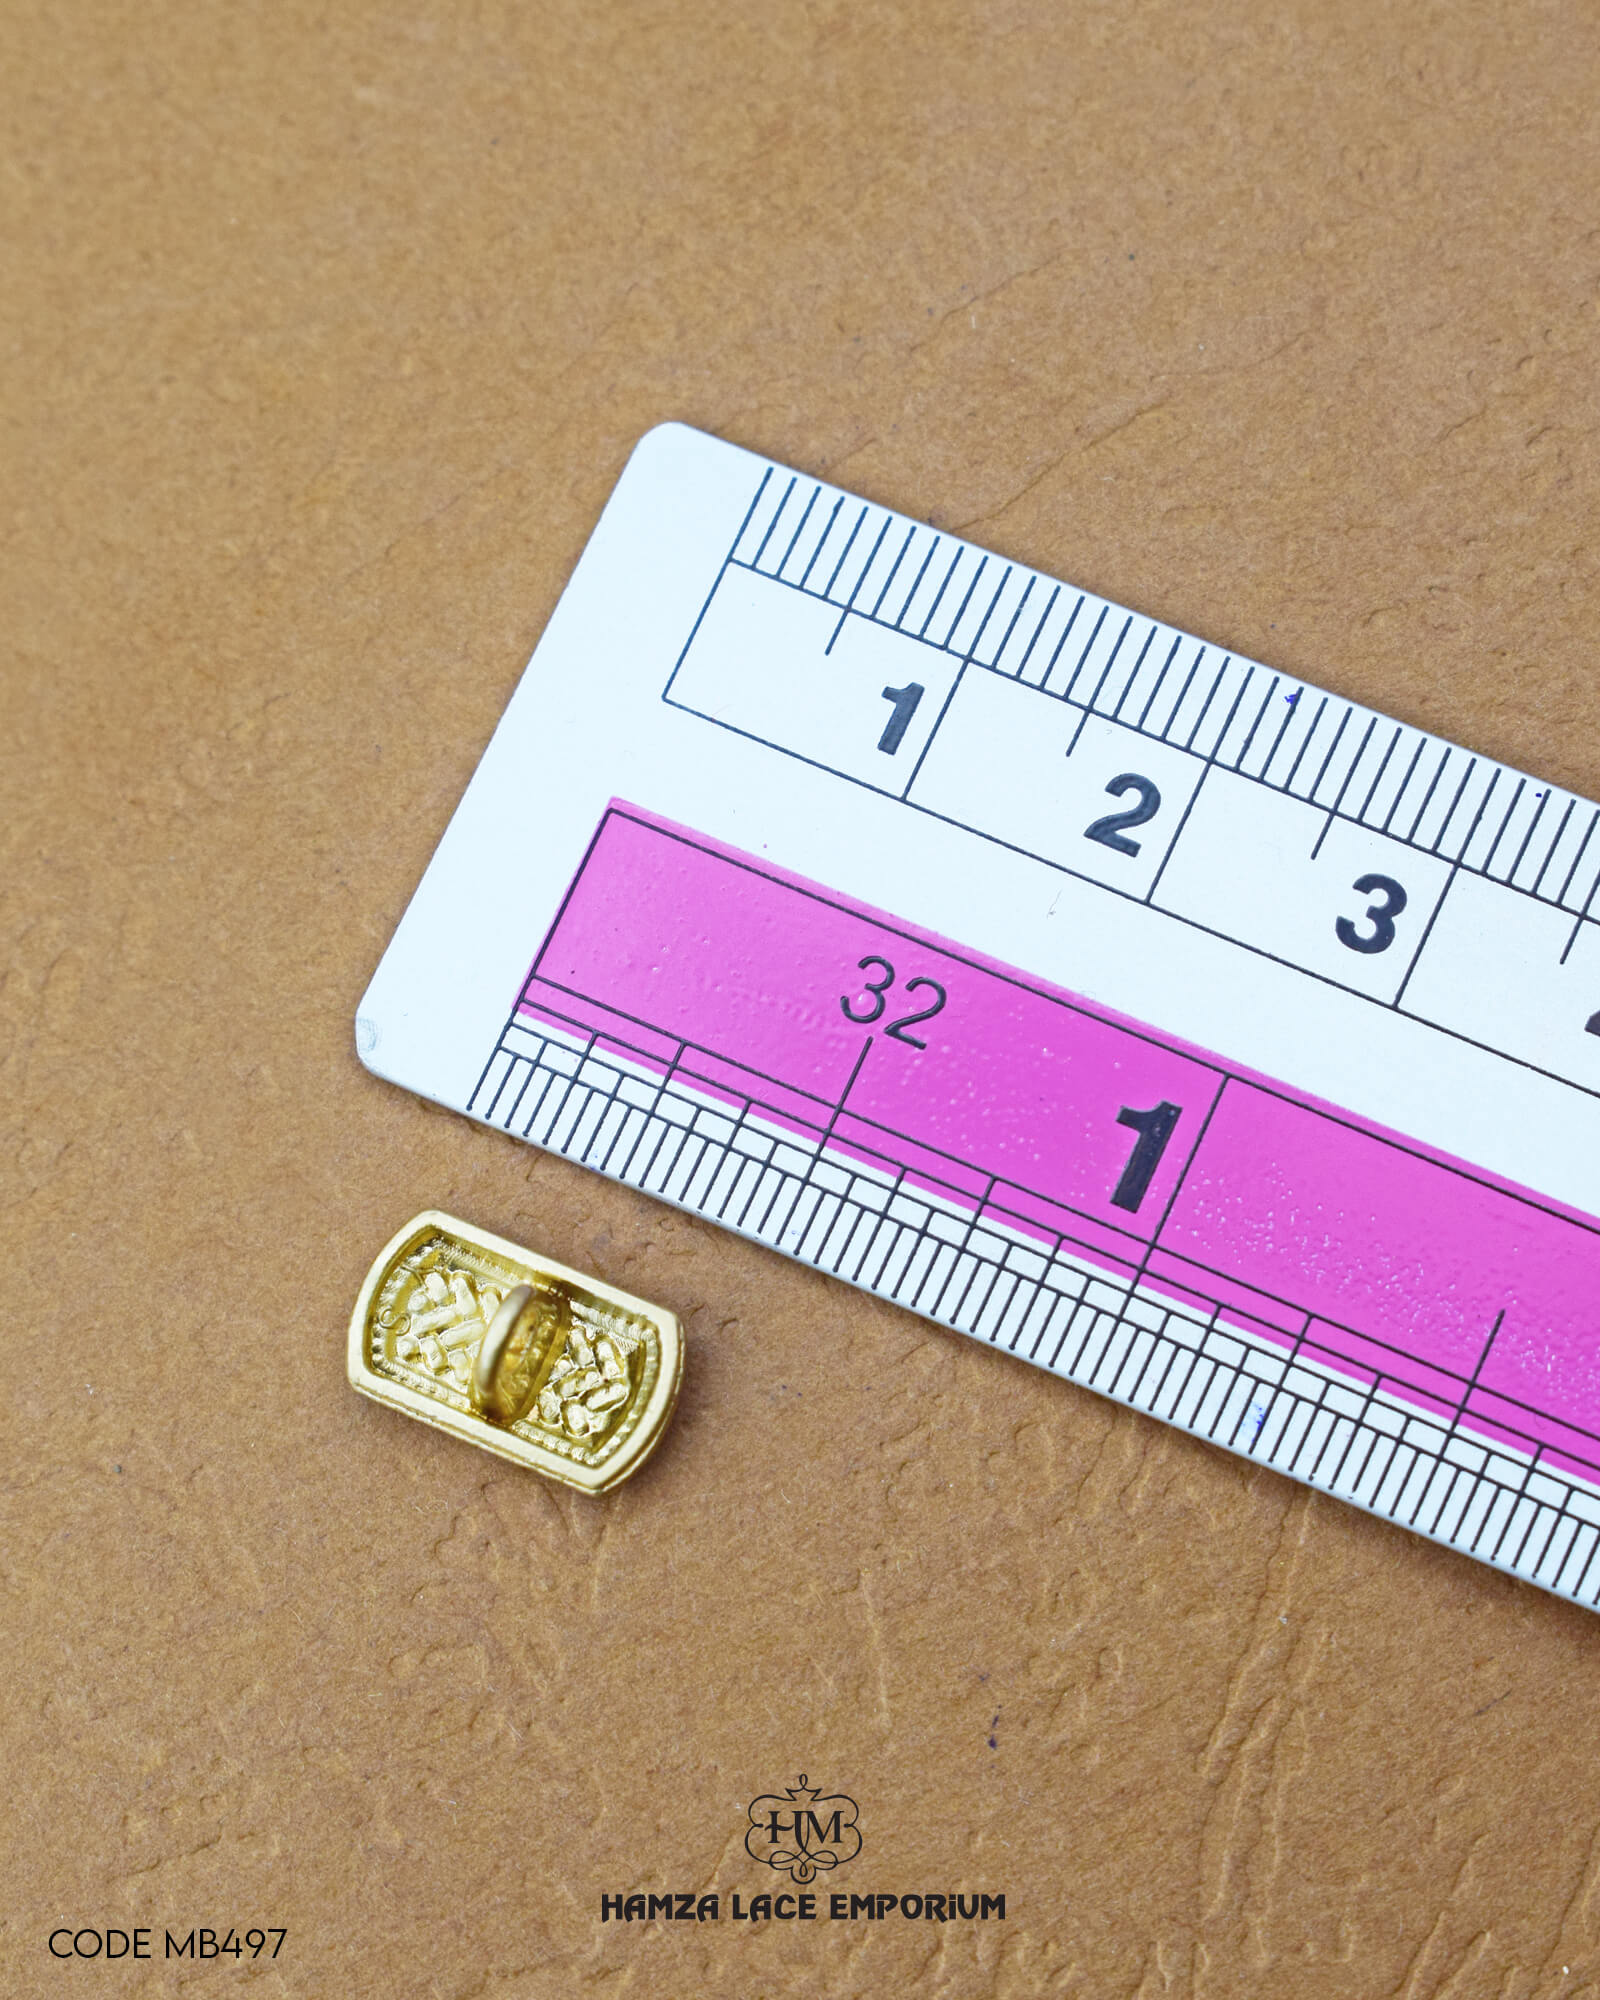 Size of the 'Golden Metal Button MB497' is given with the help of a ruler